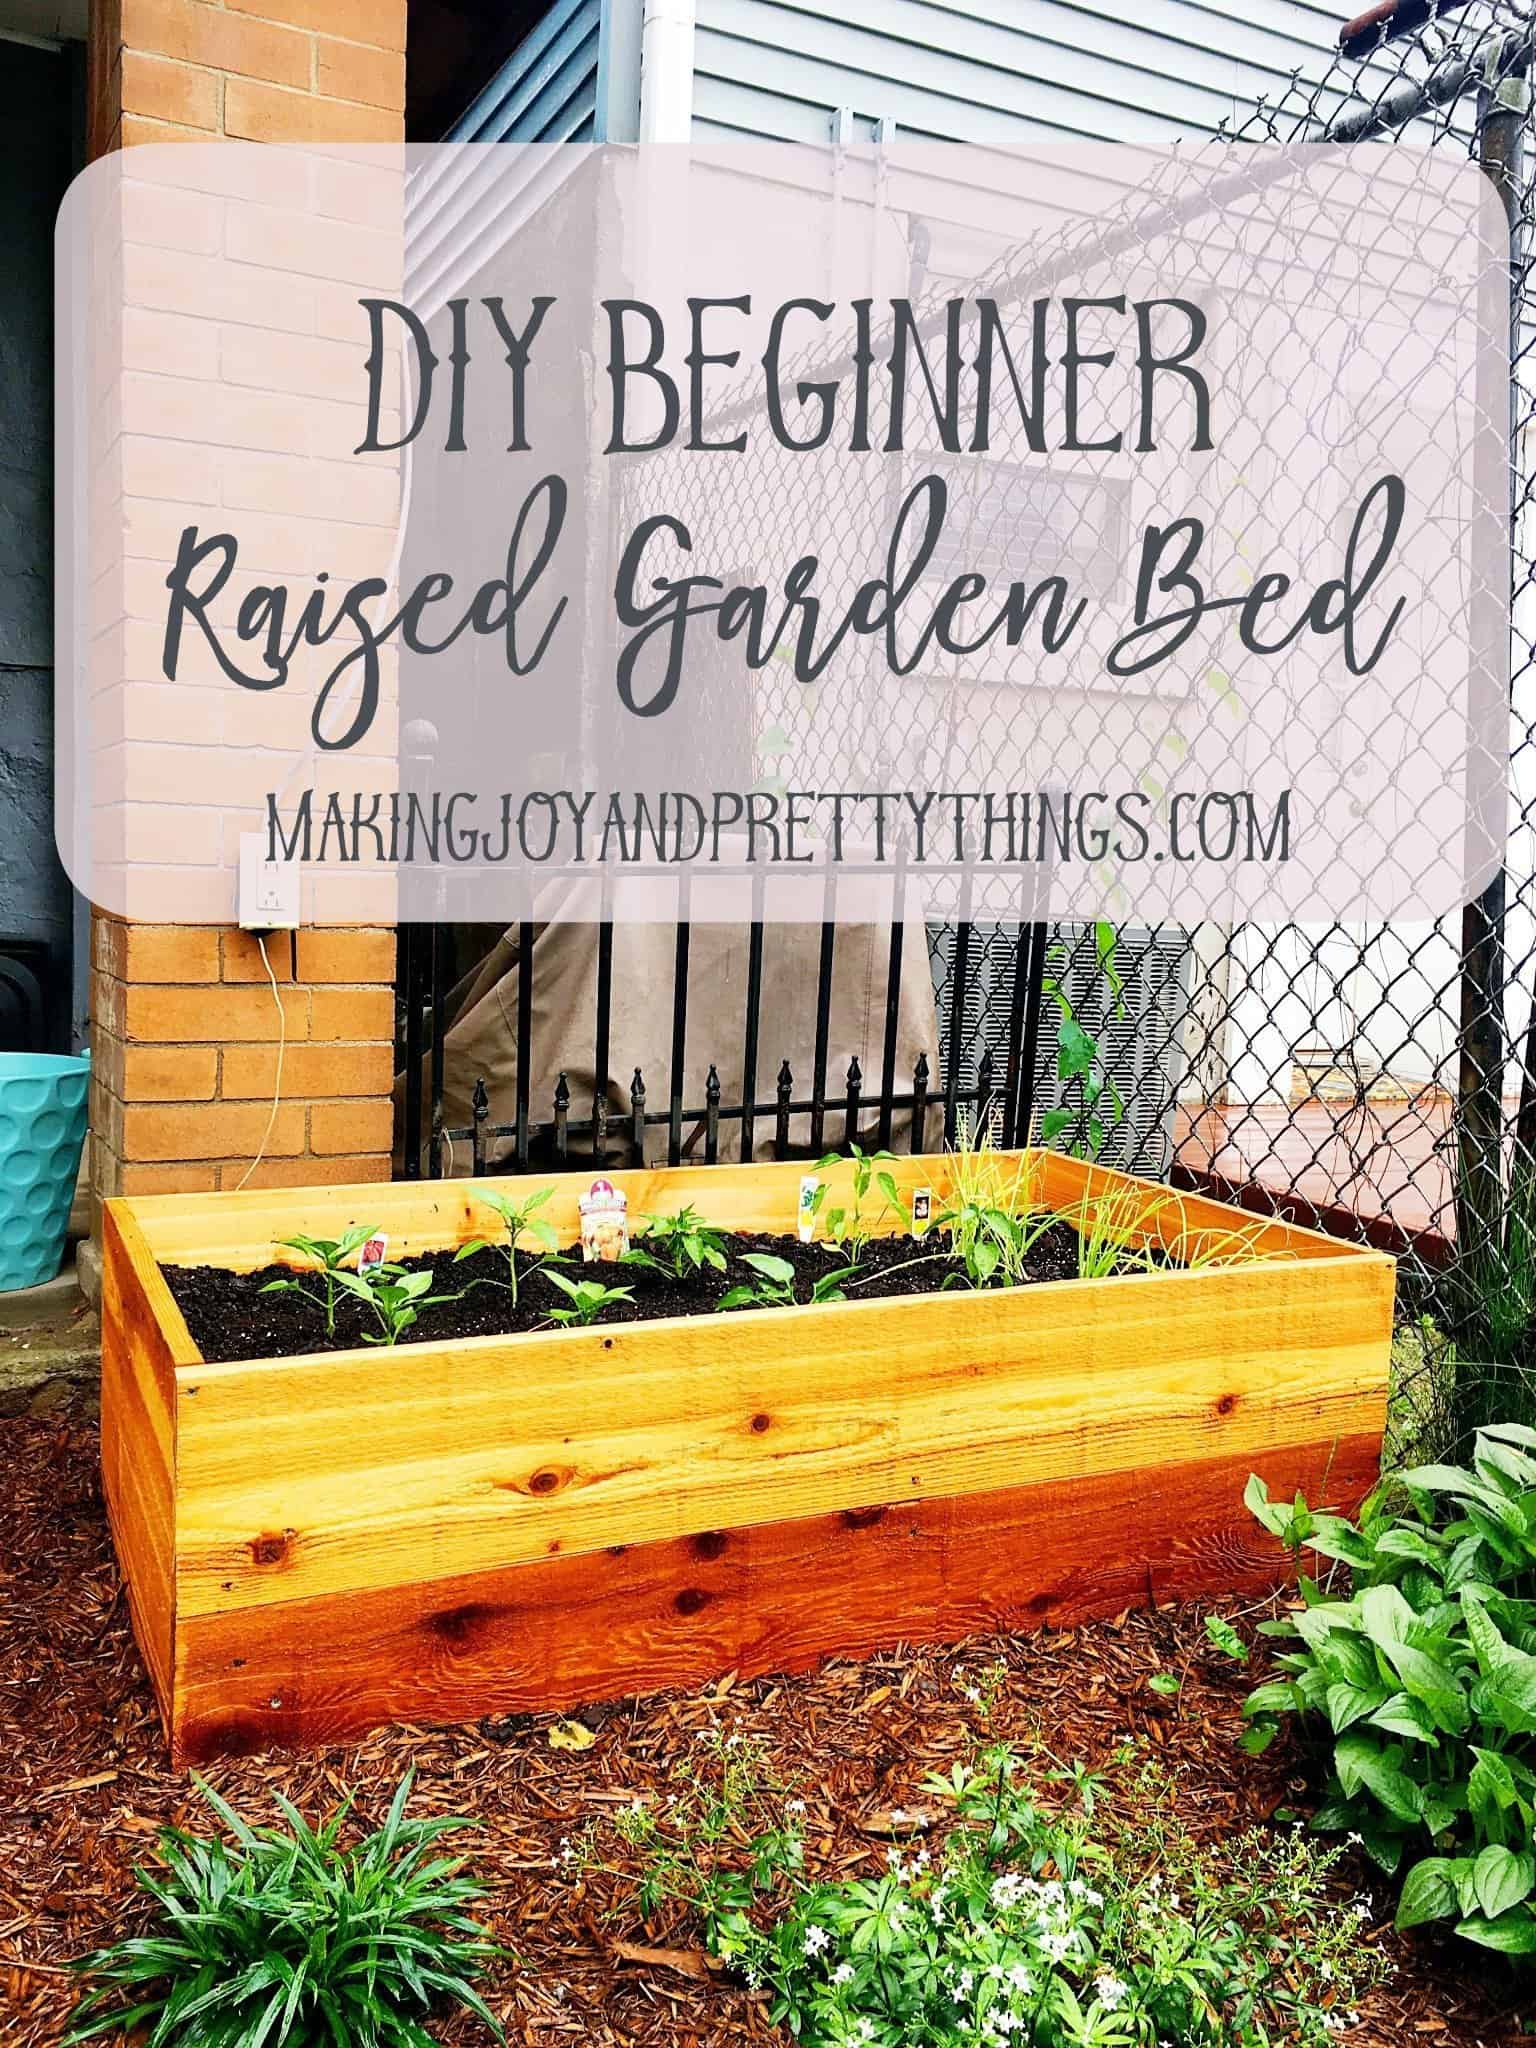 DIY Beginner Raised Garden Bed perfect for small yards and beginner gardeners. Easy DIY that can be done in an afternoon.